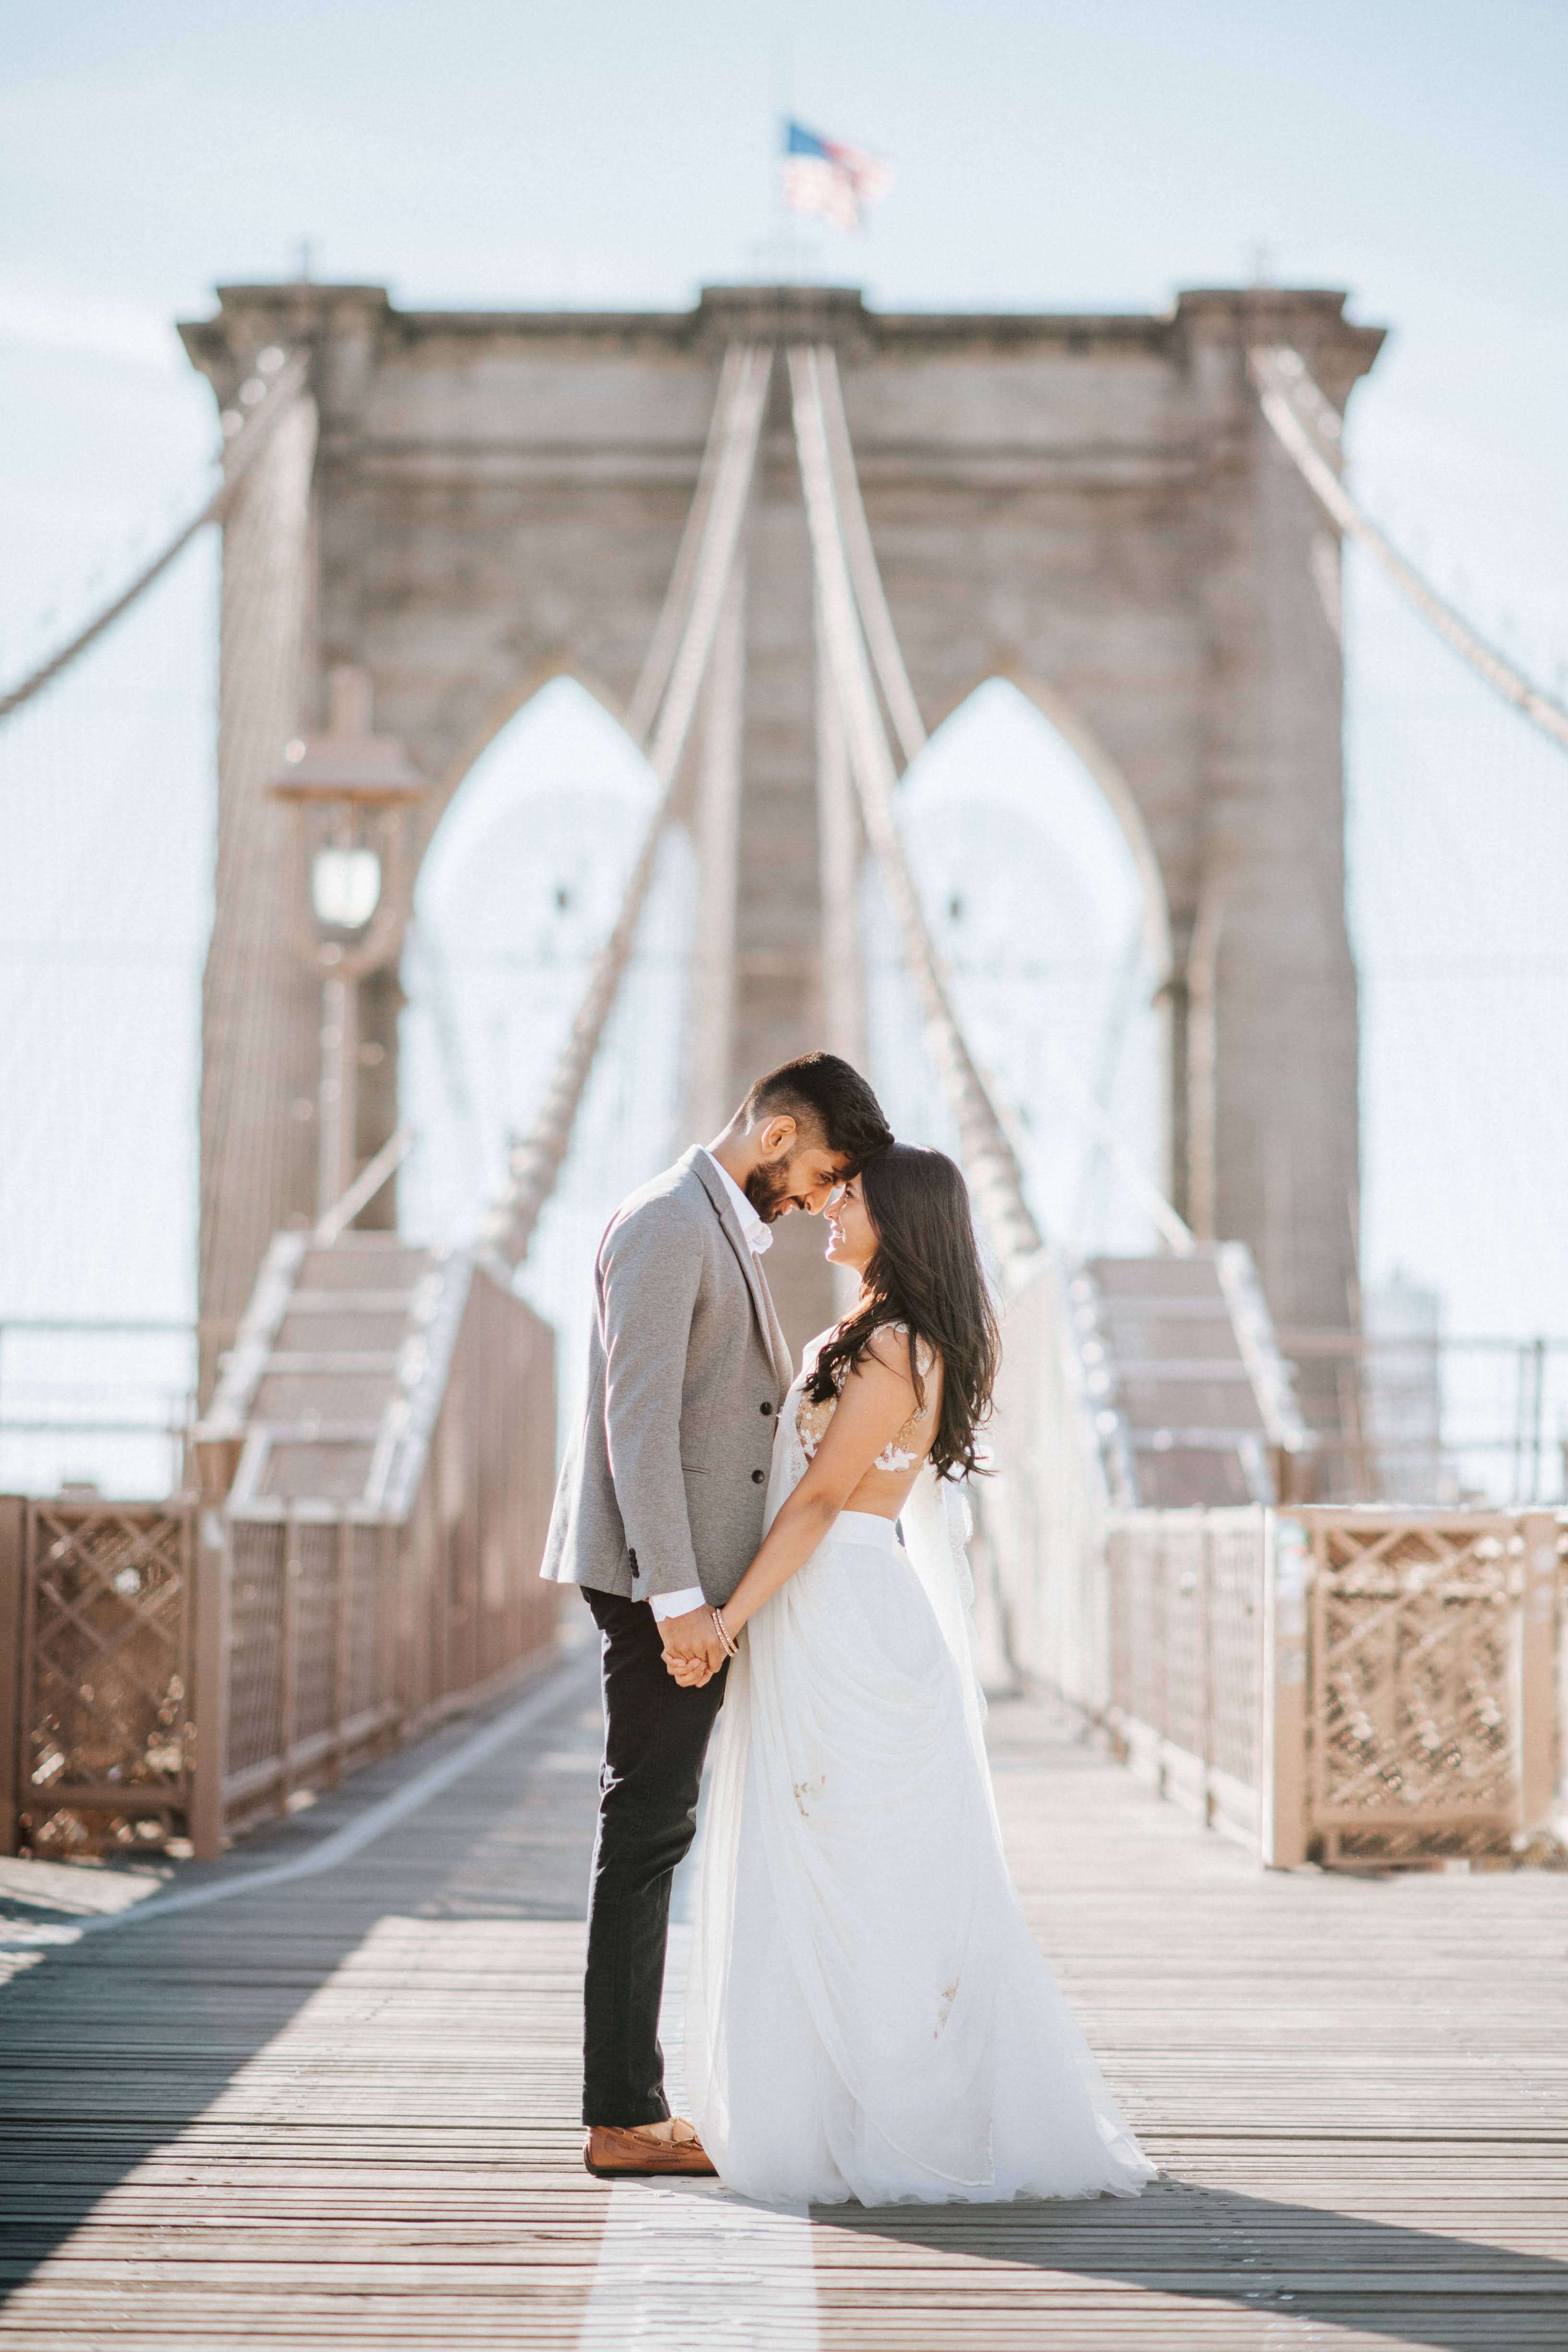 A Dreamy NYC Engagement